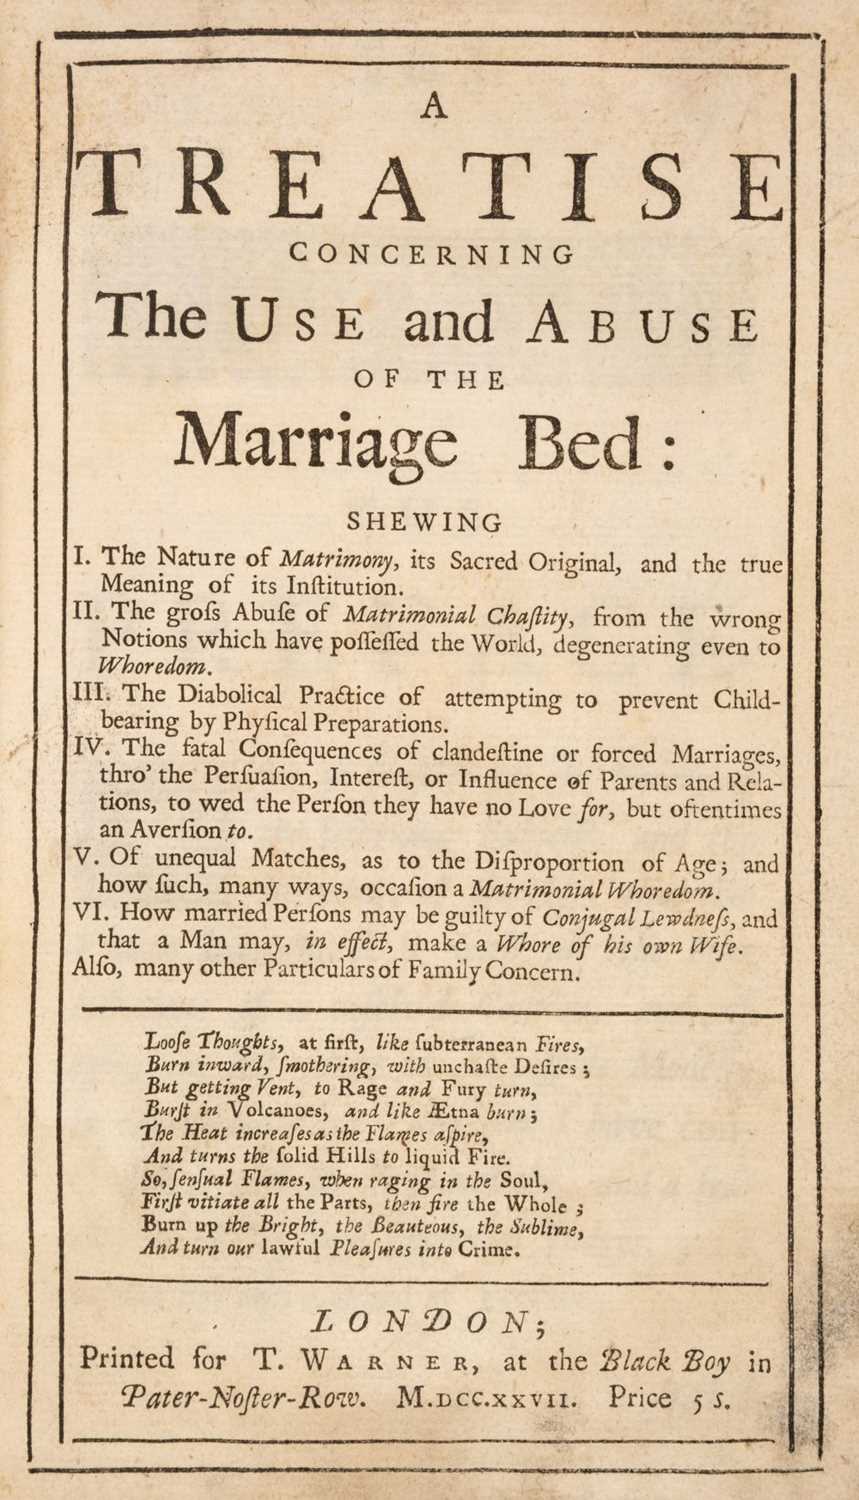 Lot 123 - Daniel Defoe. Treatise concerning the Use and Abuse of the Marriage Bed, 1st edition, 1727